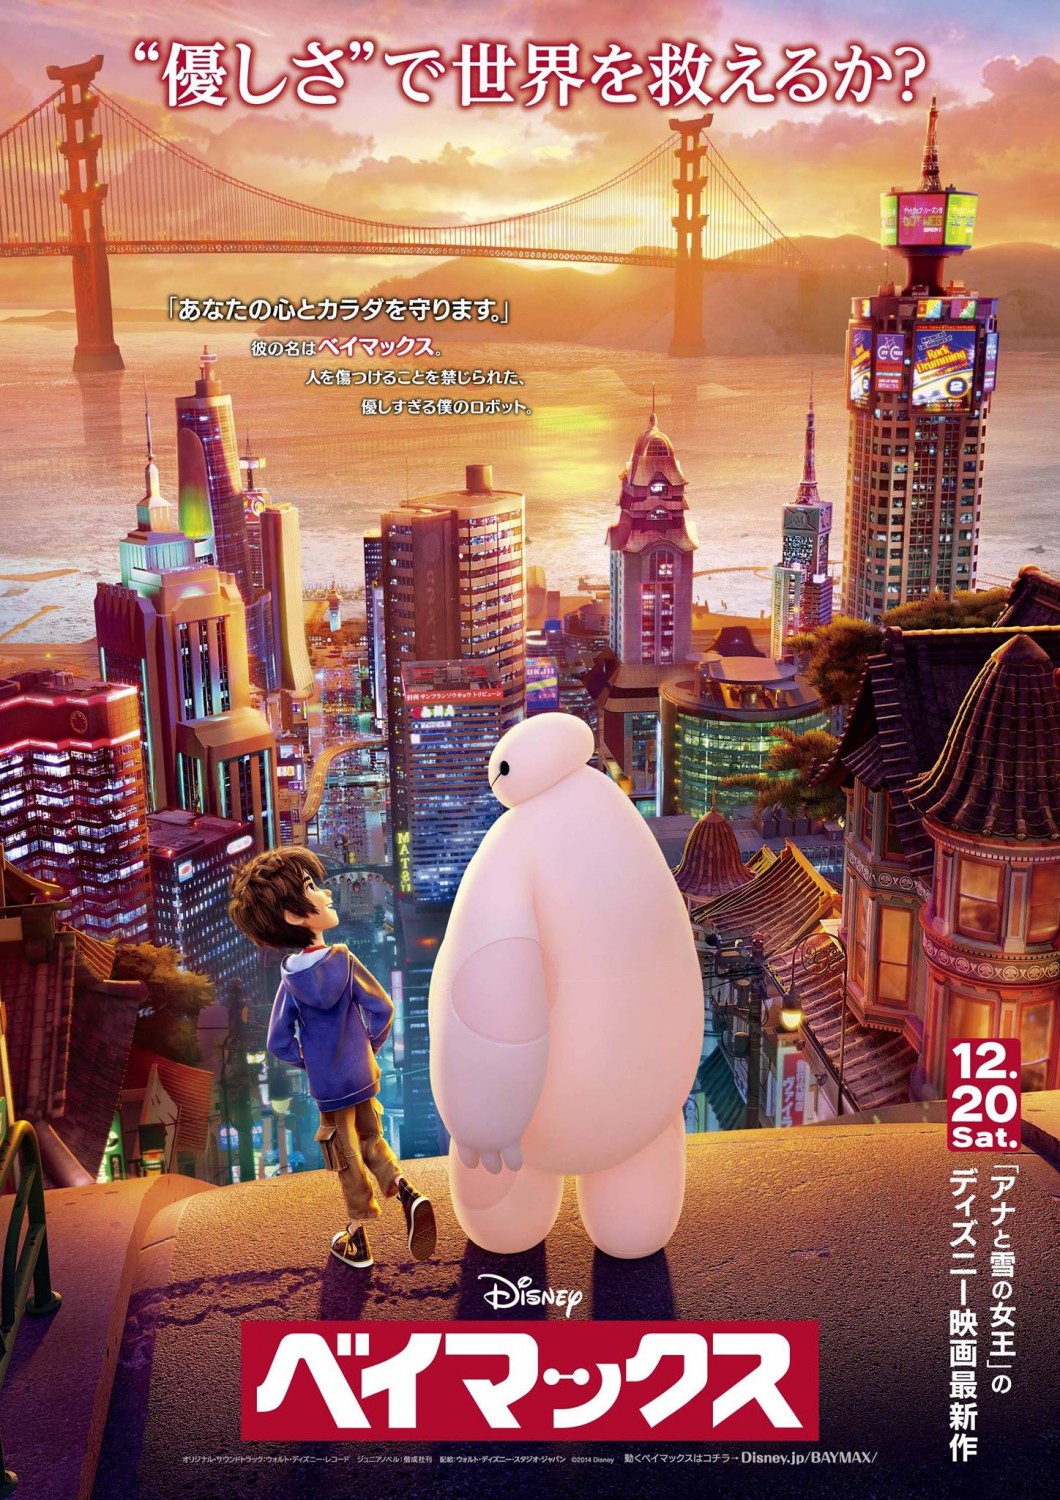 Extra Large Movie Poster Image for Big Hero 6 (#10 of 20)